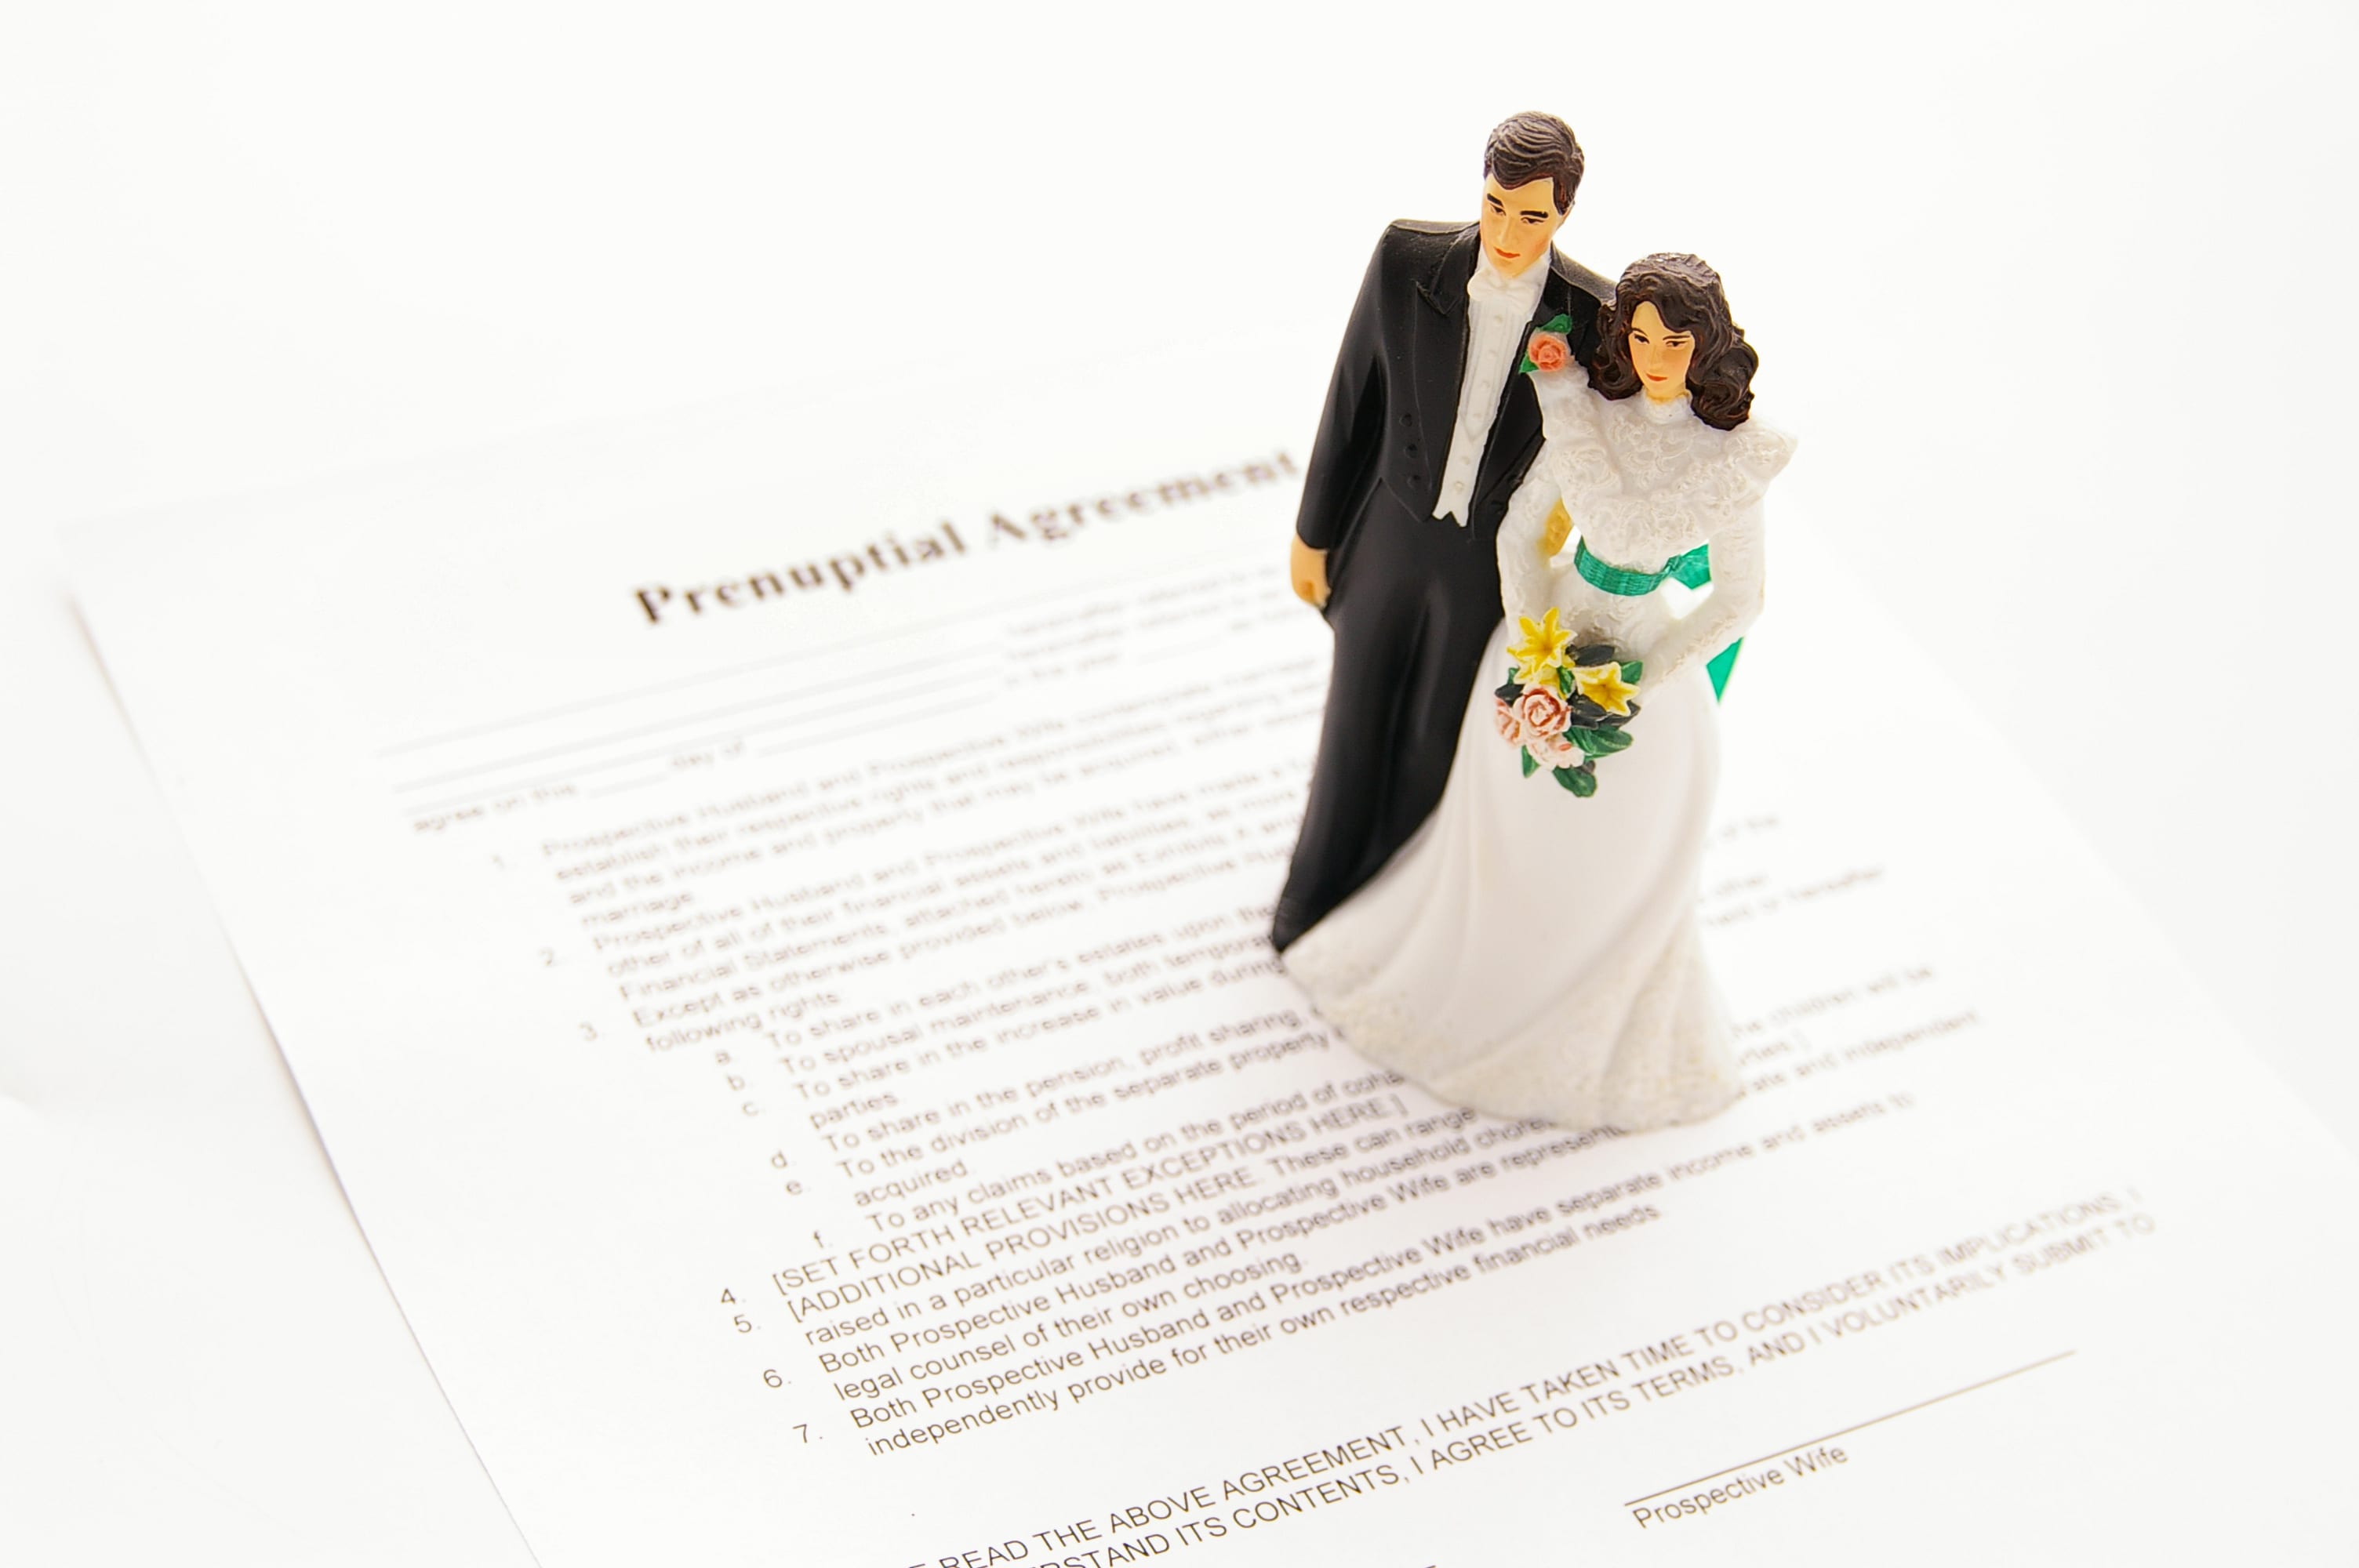 Hardship pursuant to s90K(1)(d) of the Family Law Act – How and when may the Court set aside a Binding Financial agreement on this ground?